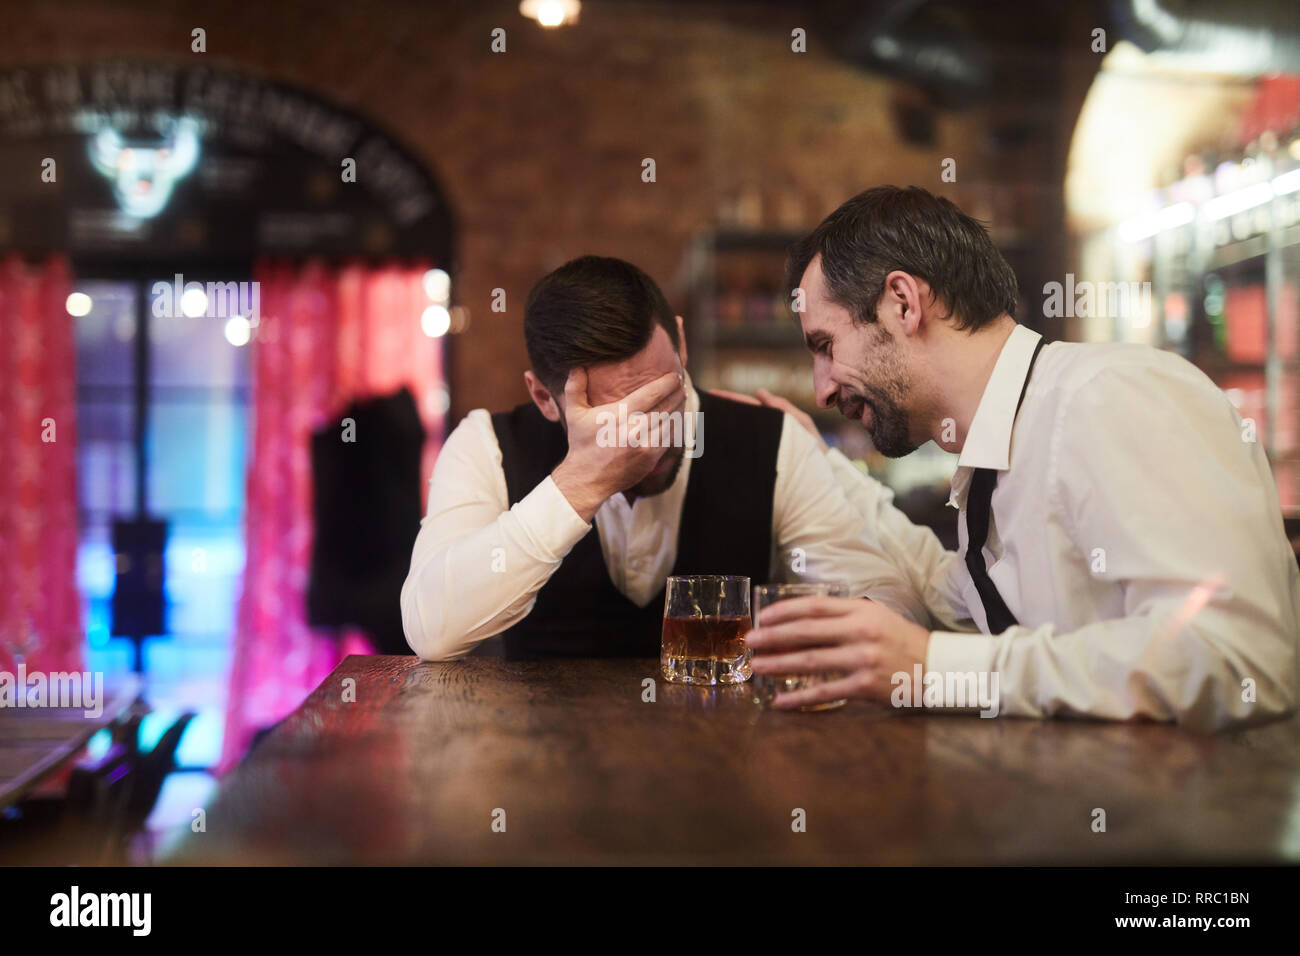 Drunk Business People in Pub Stock Photo - Alamy